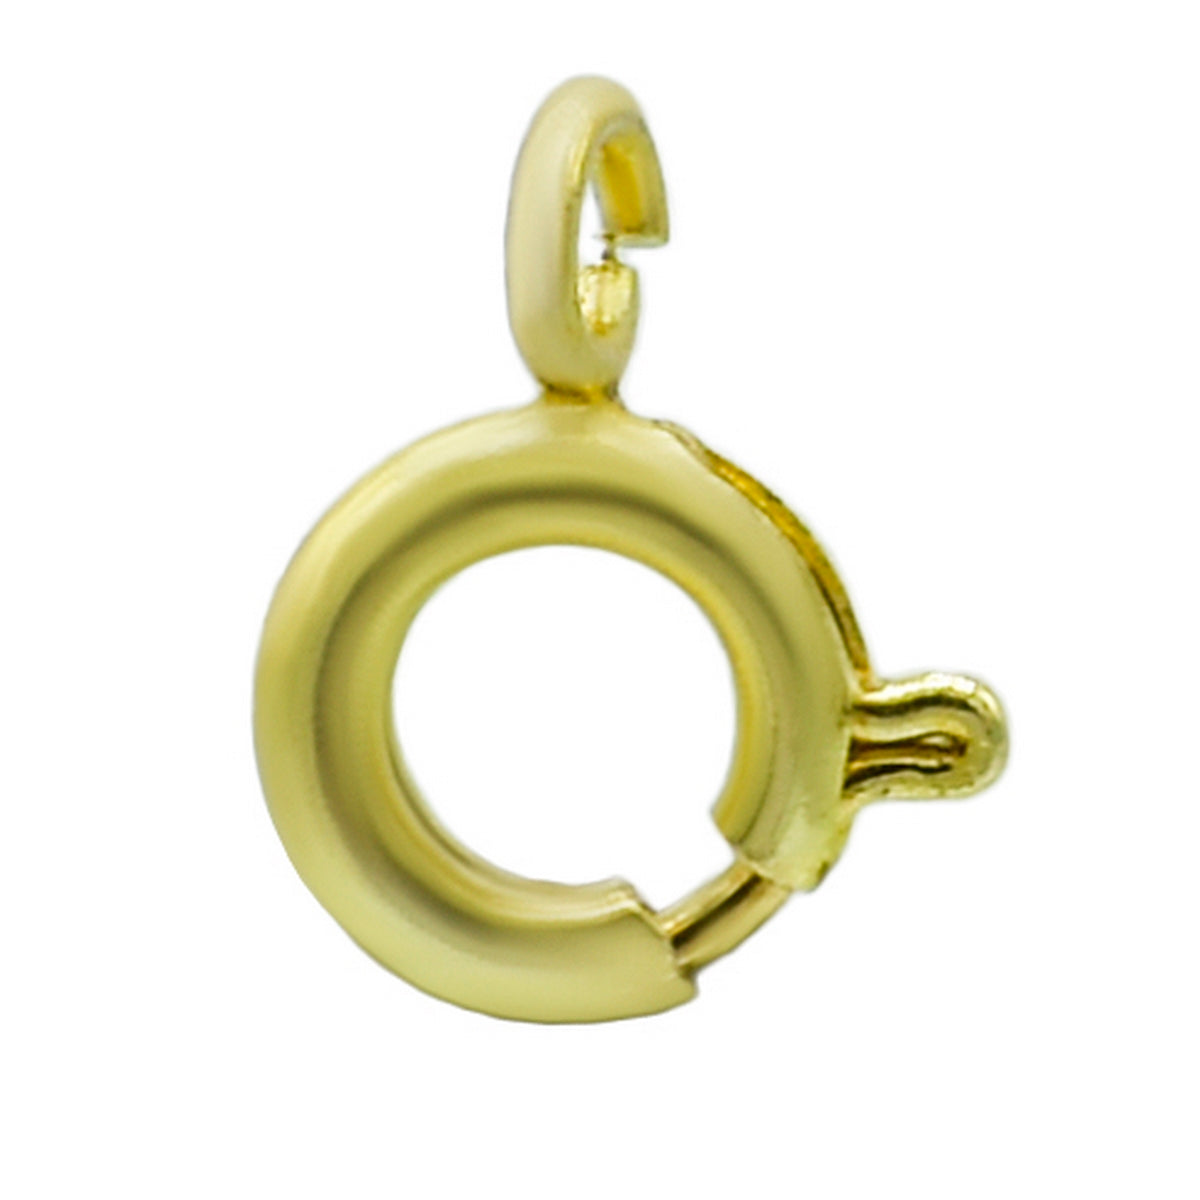 jags-mumbai Resin Accessories And More Jewellery Springring Hooks Small Gold Set Of 10 Pcs JSHG01